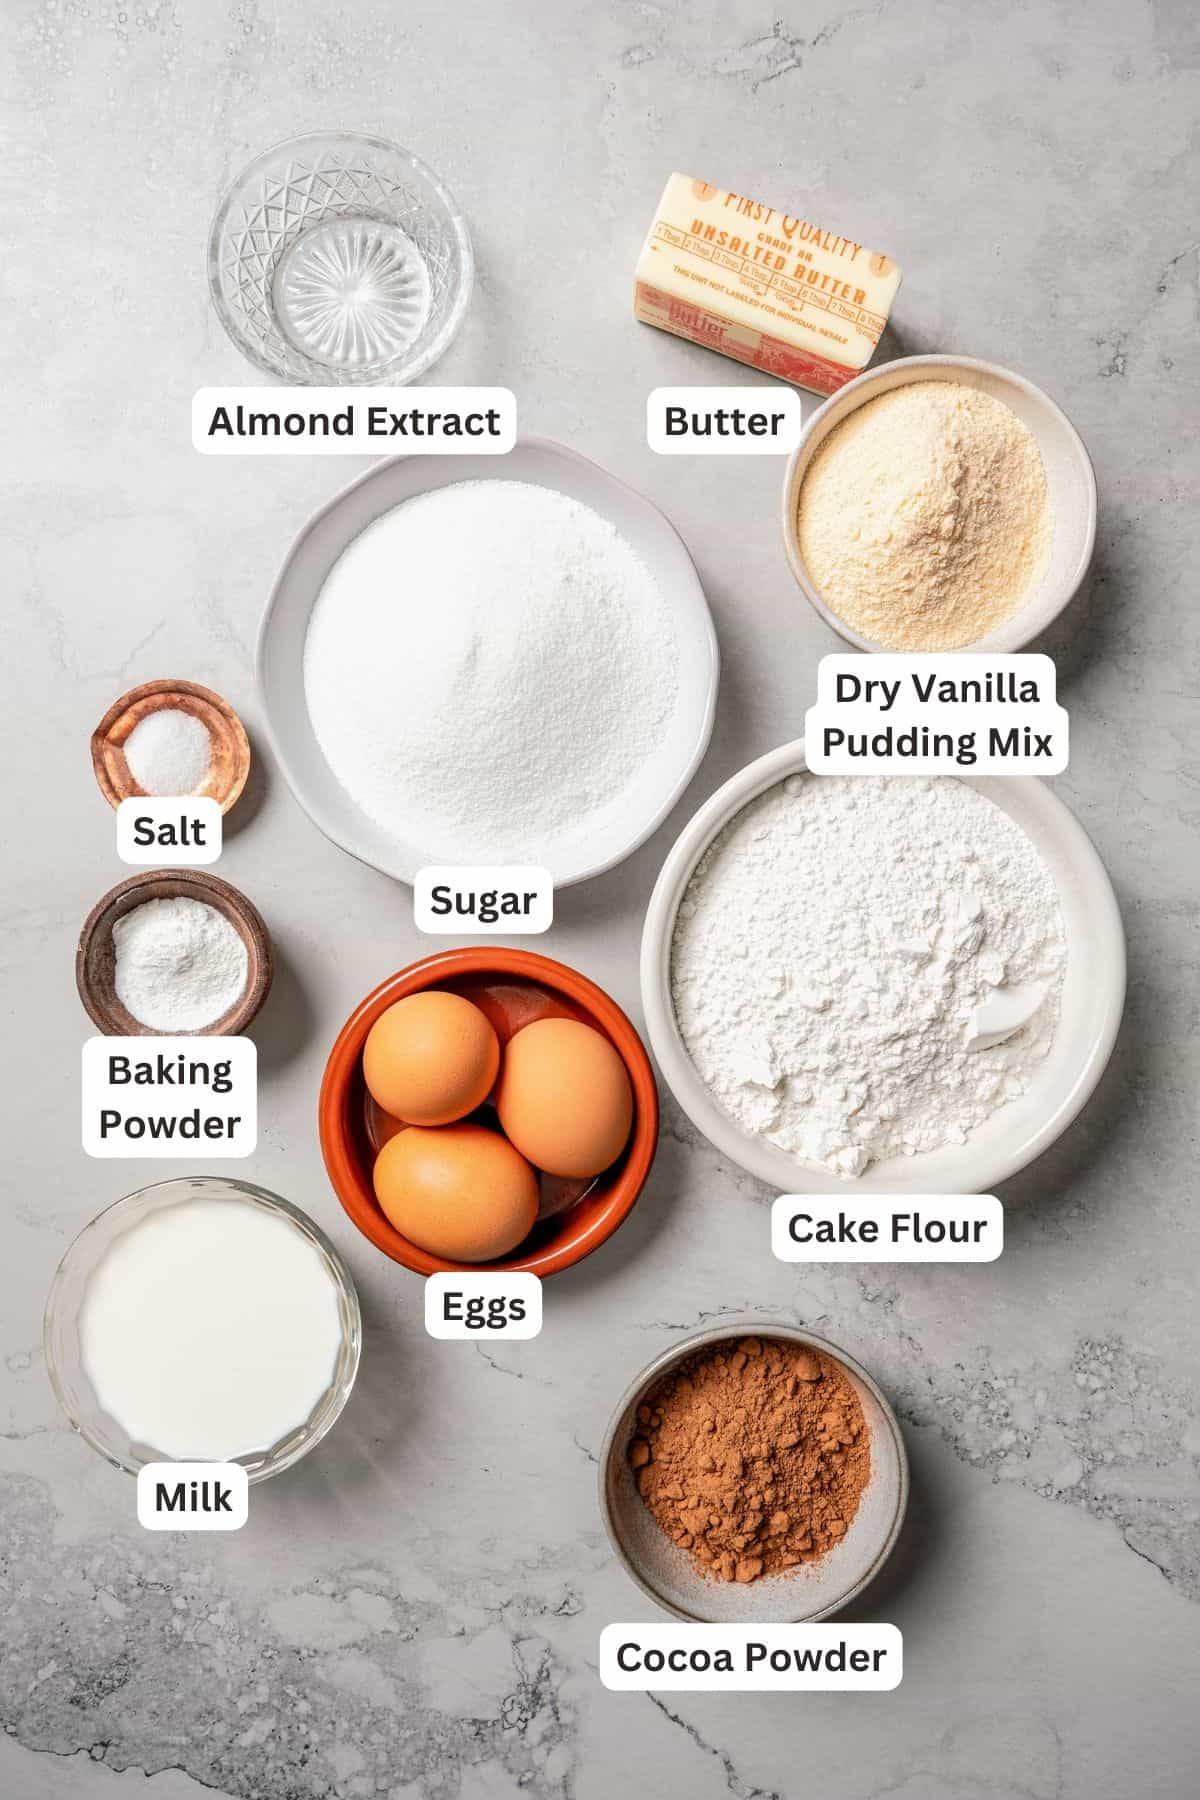 German marble cake ingredients with text labels overlaying each ingredient.